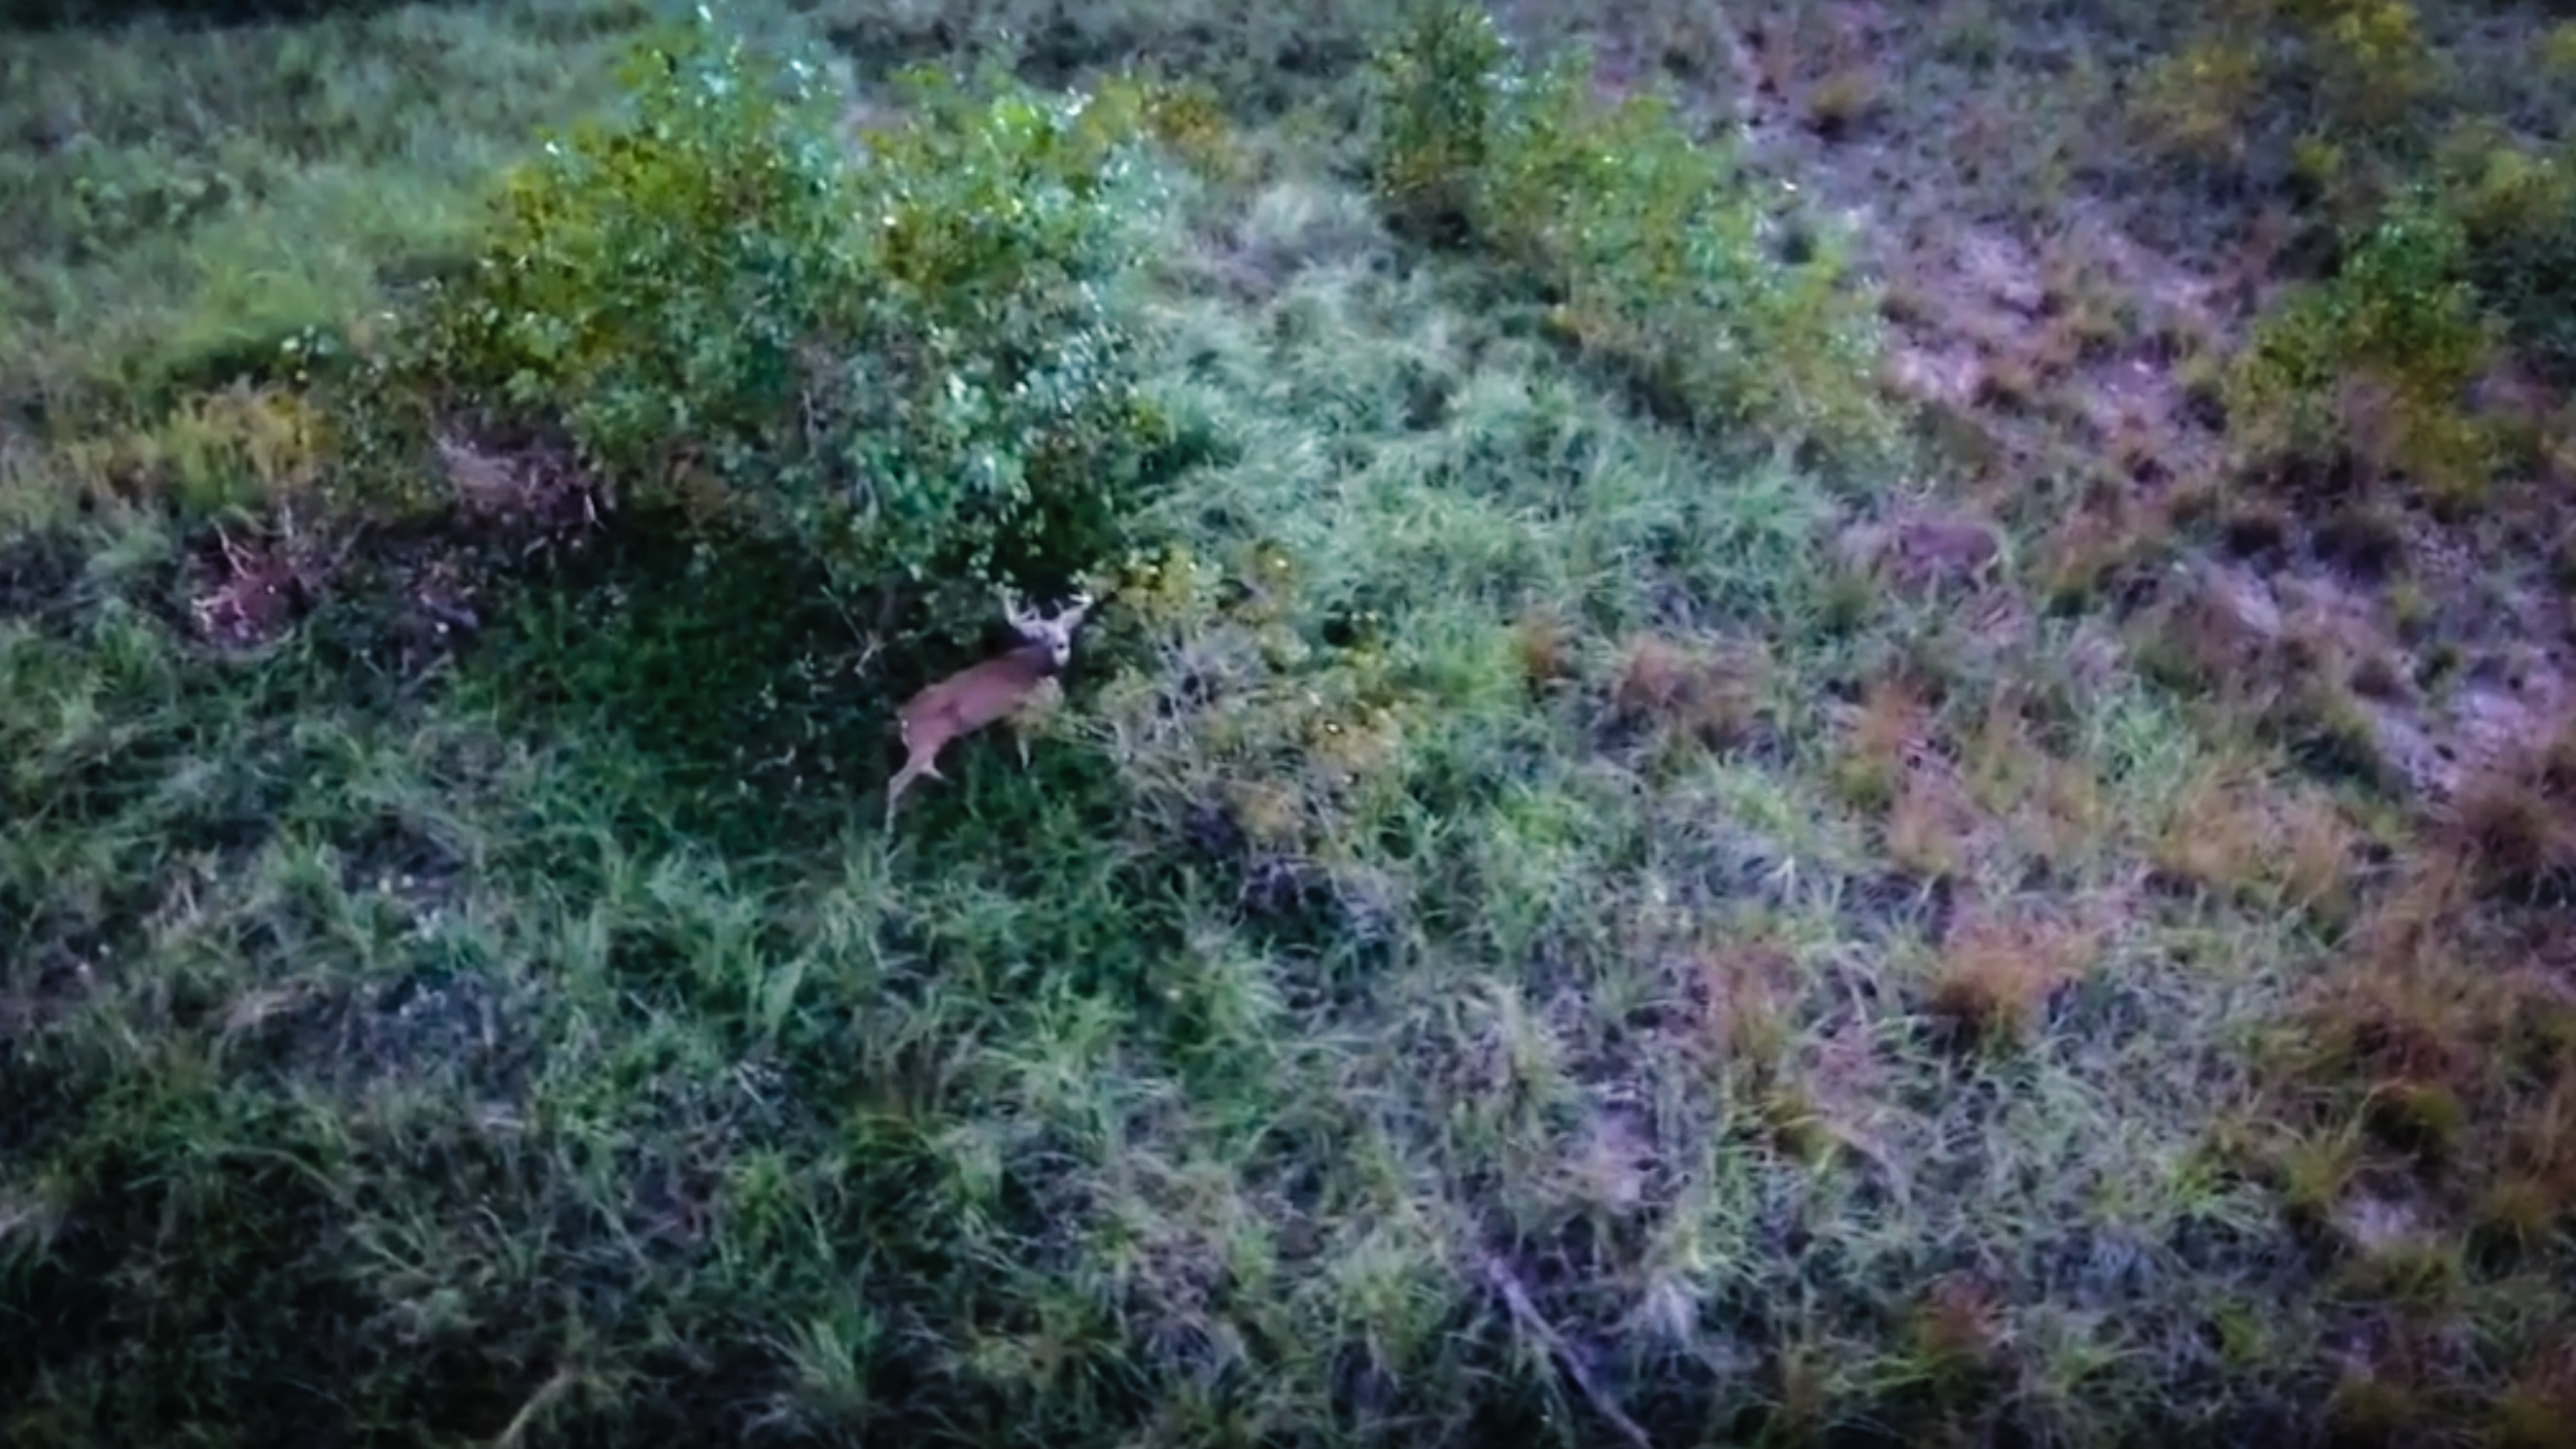 A buck is pictured by an unmanned drone in footage uploaded by a company based in Portage, Indiana